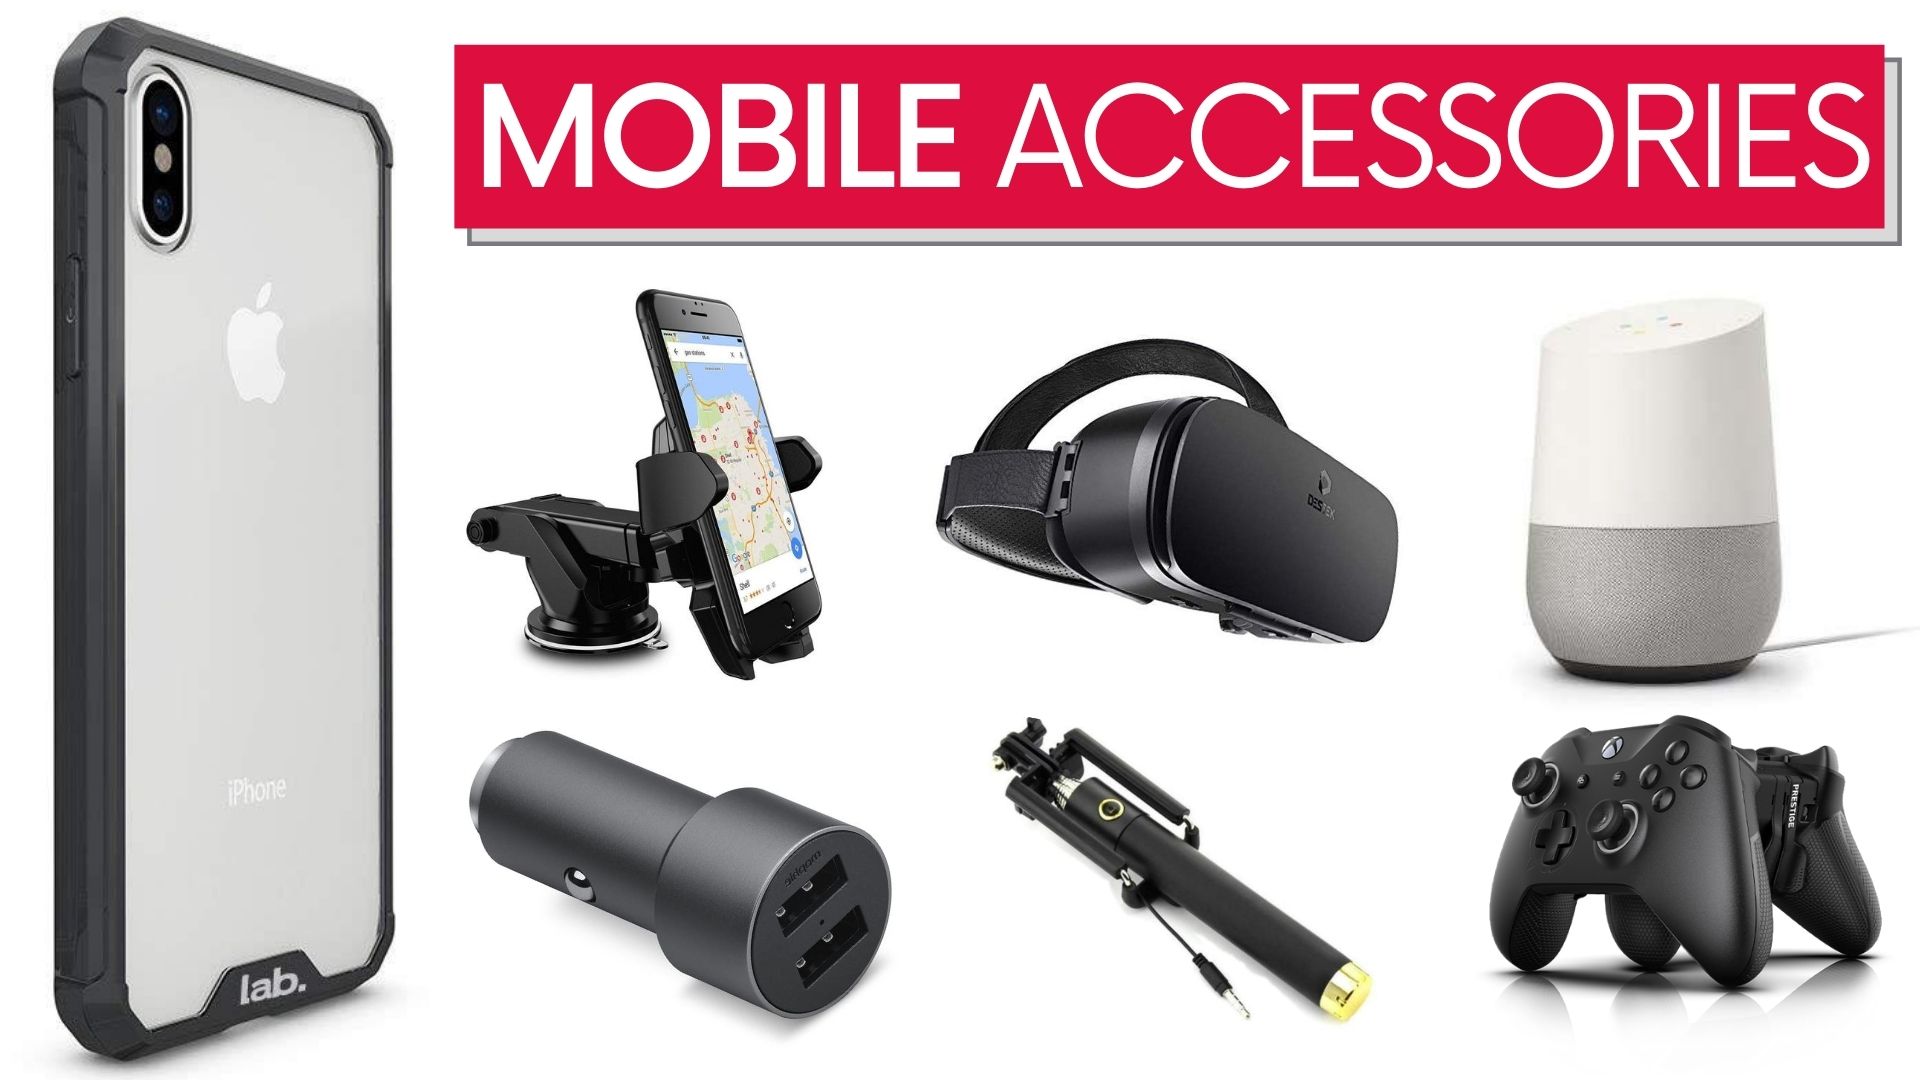 Must-Have Mobile Accessories – Smart Gadgets To Use With Your Phone